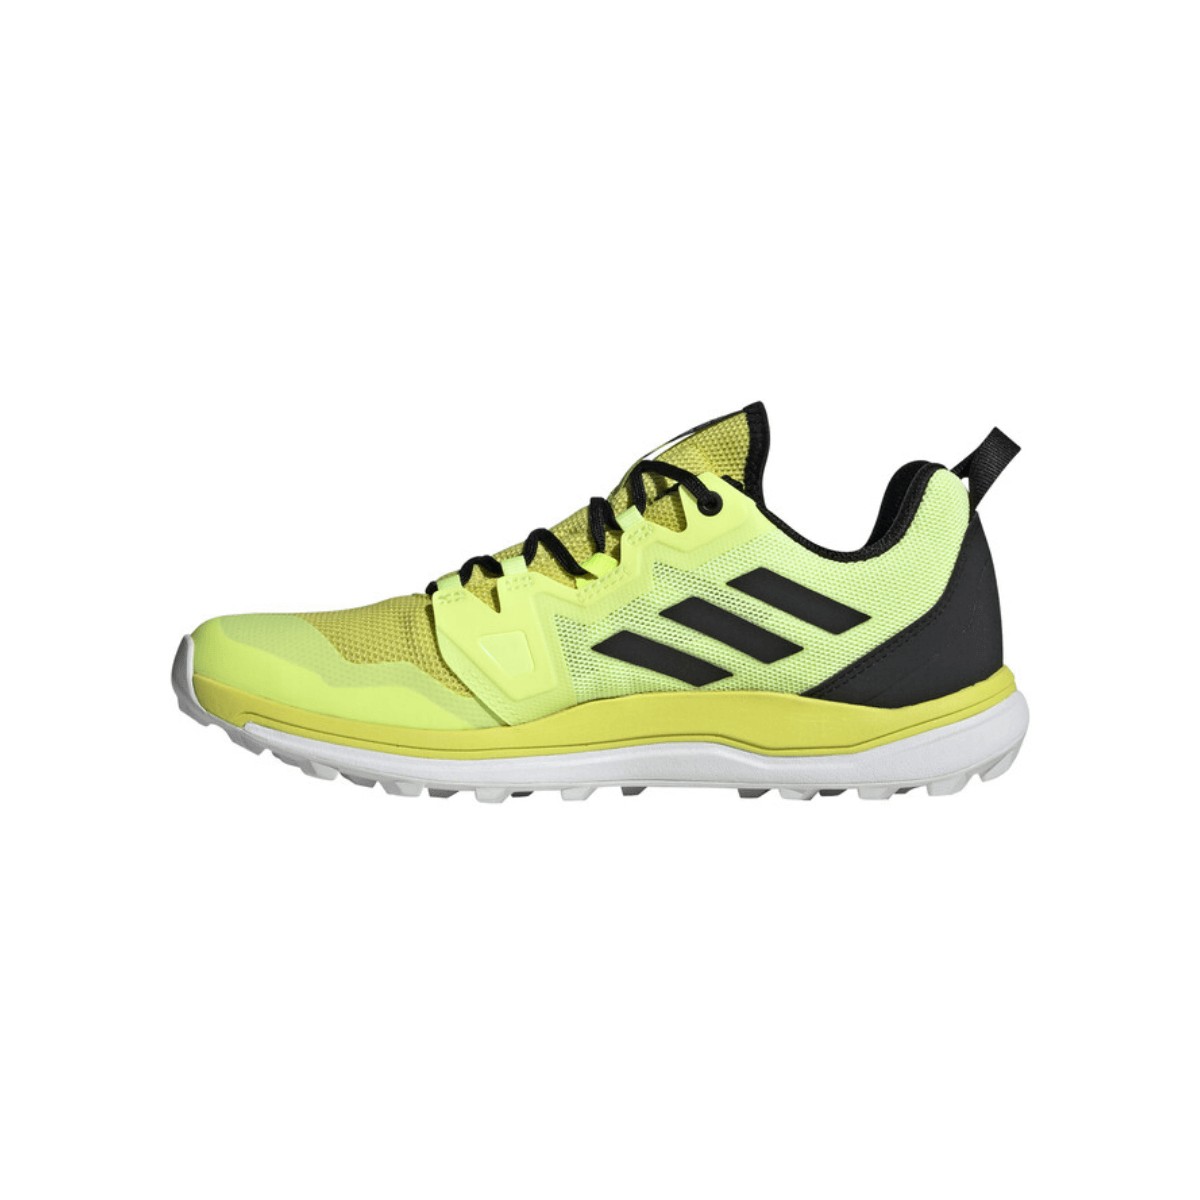 Adidas Agravic Trail Running Shoes Yellow Black